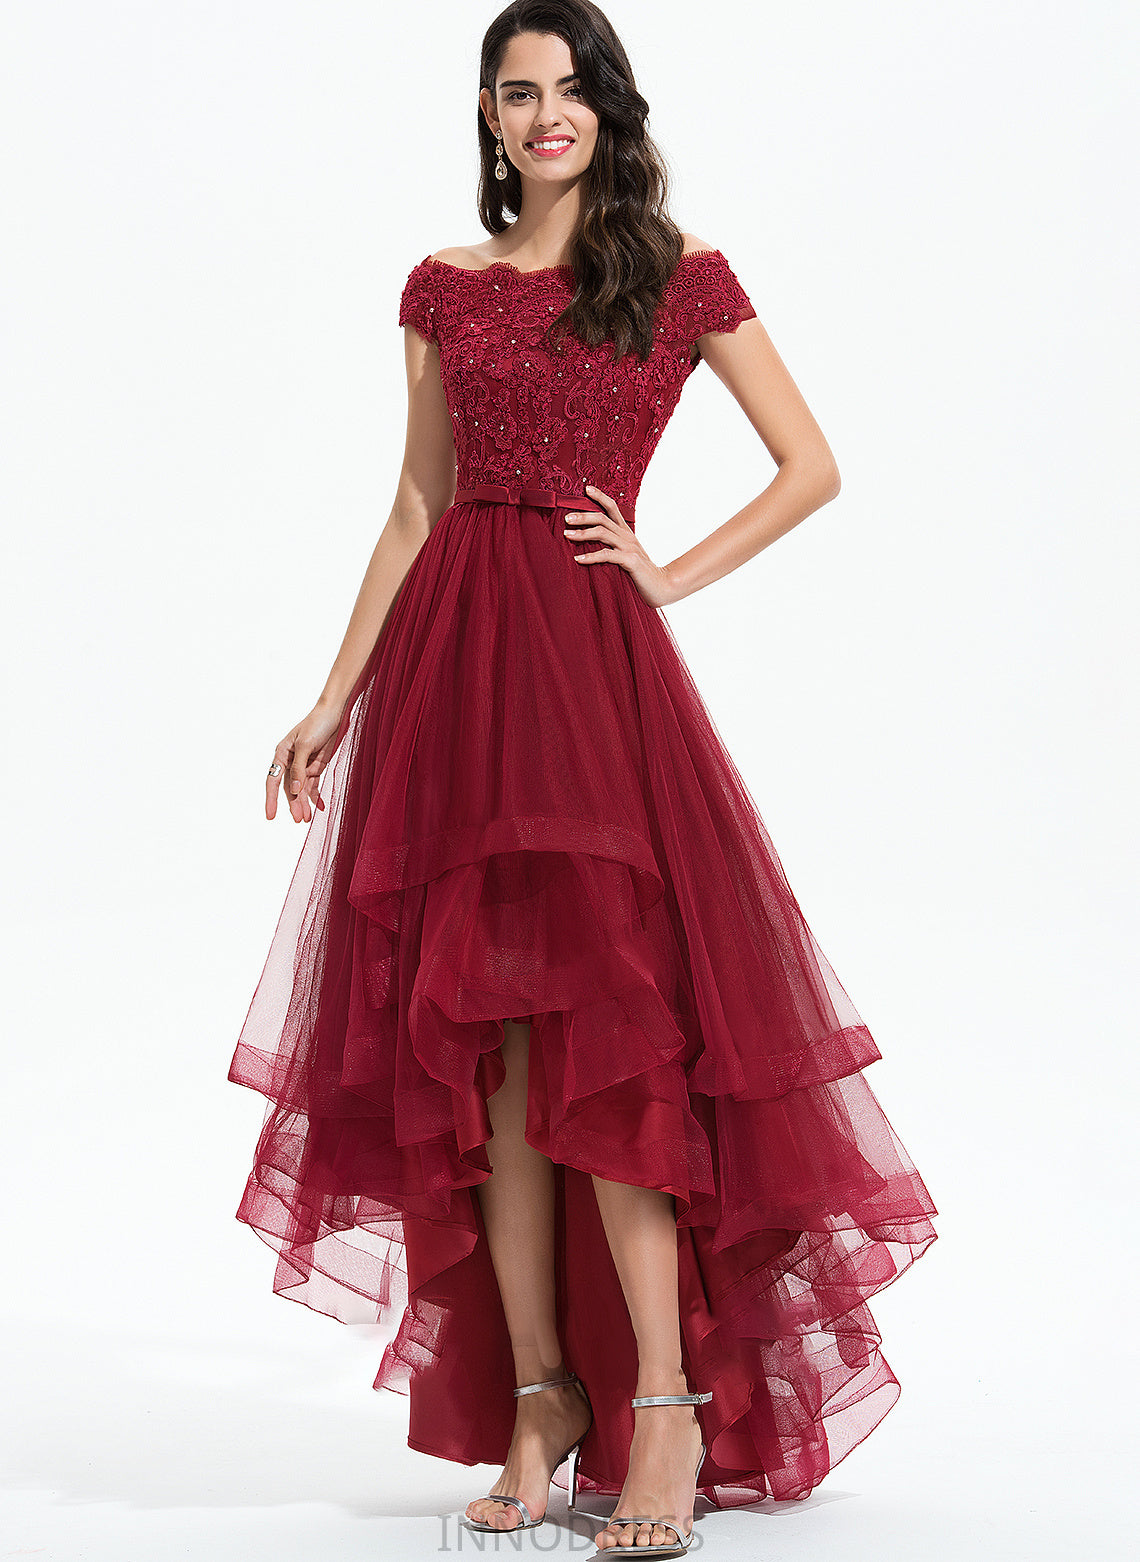 Sequins Bow(s) Dress Off-the-Shoulder Tulle Asymmetrical With Wedding Dresses Beading Ball-Gown/Princess Hillary Wedding